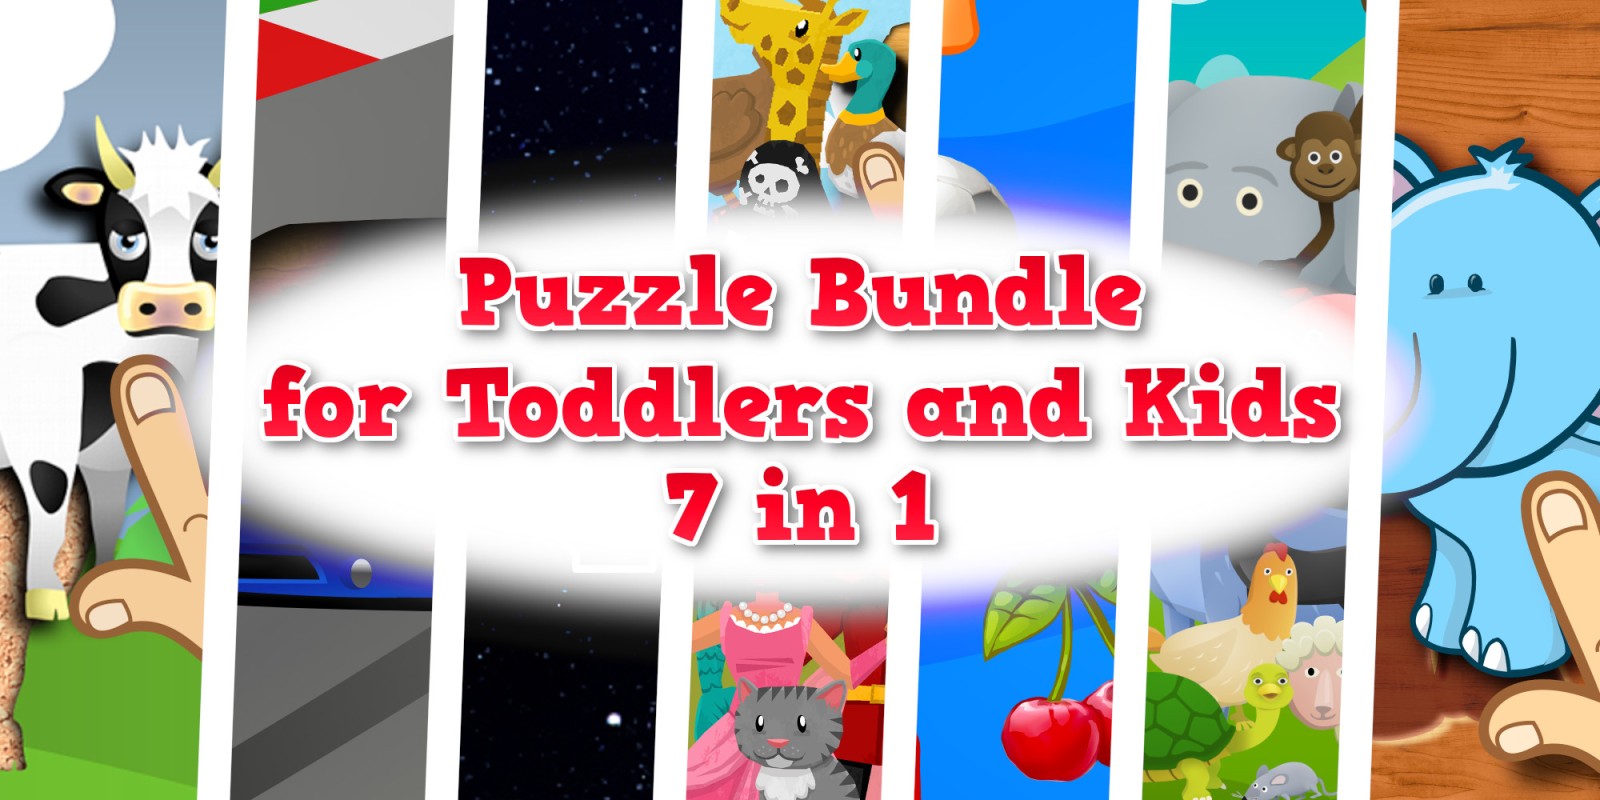 Puzzle Bundle for Toddlers and Kids - 7 in 1